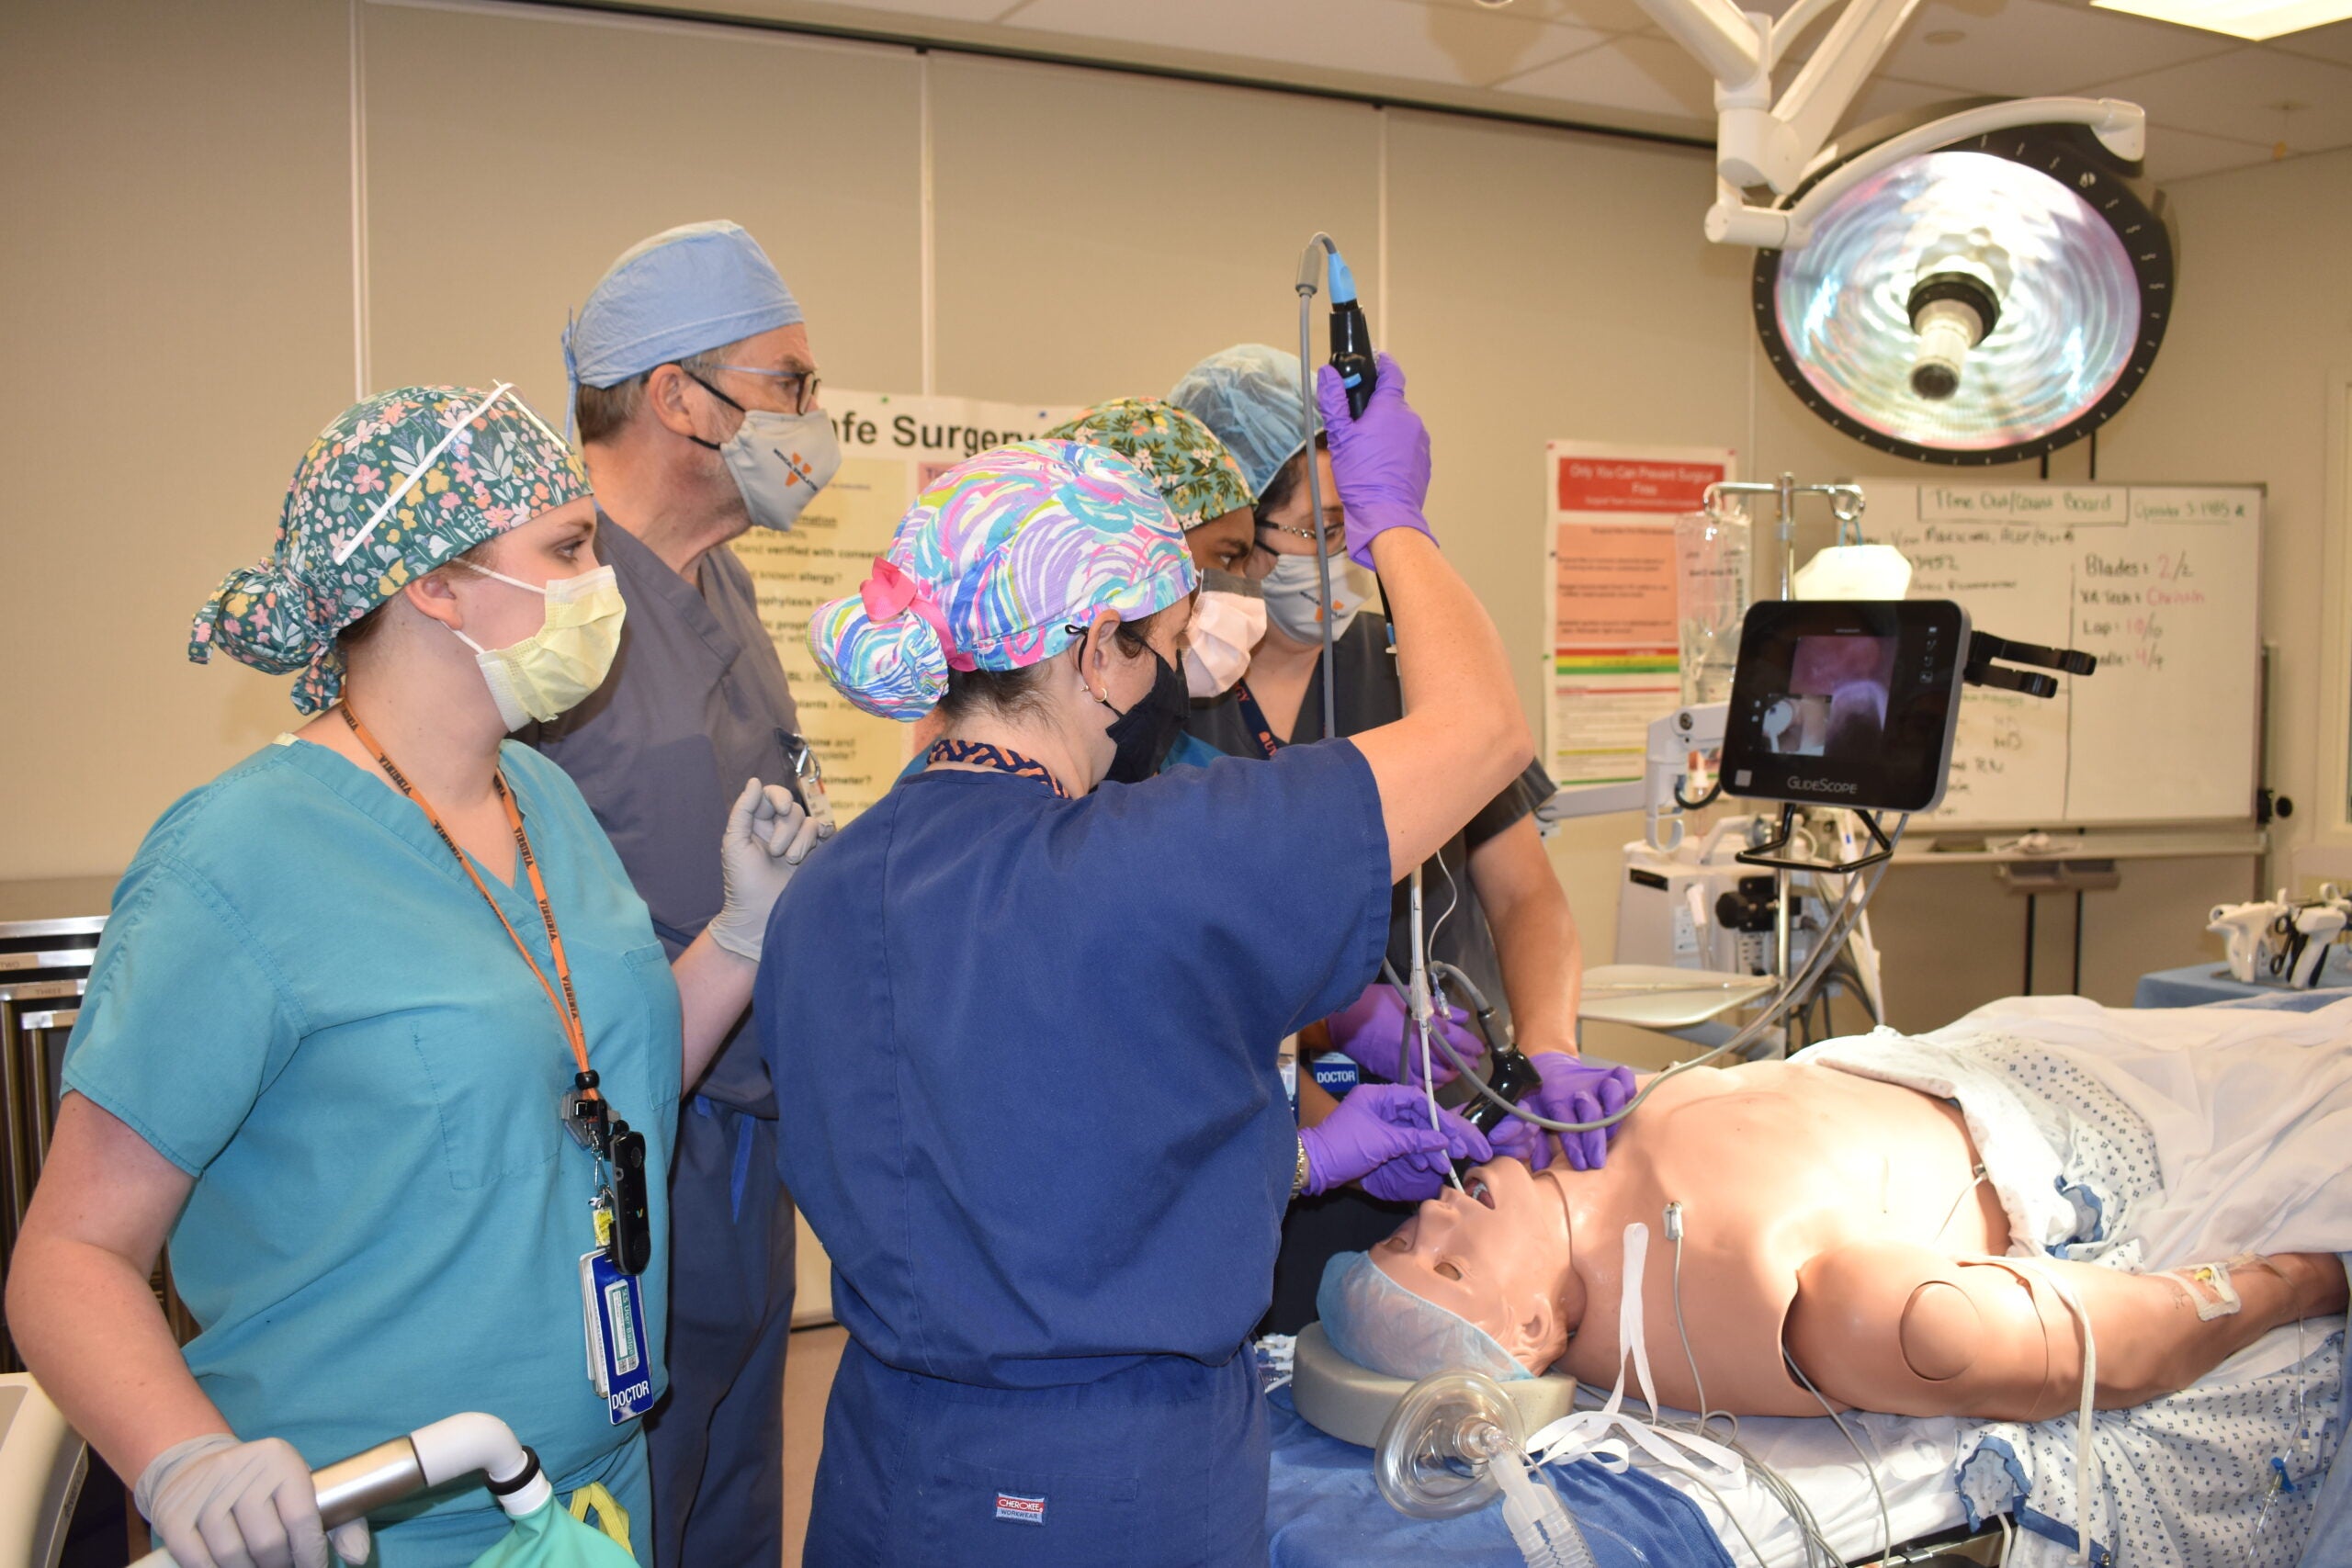 University of Virginia Anesthesia faculty Dr. Keith Littlewood teaches residents how to intubate in the Simulation Center.